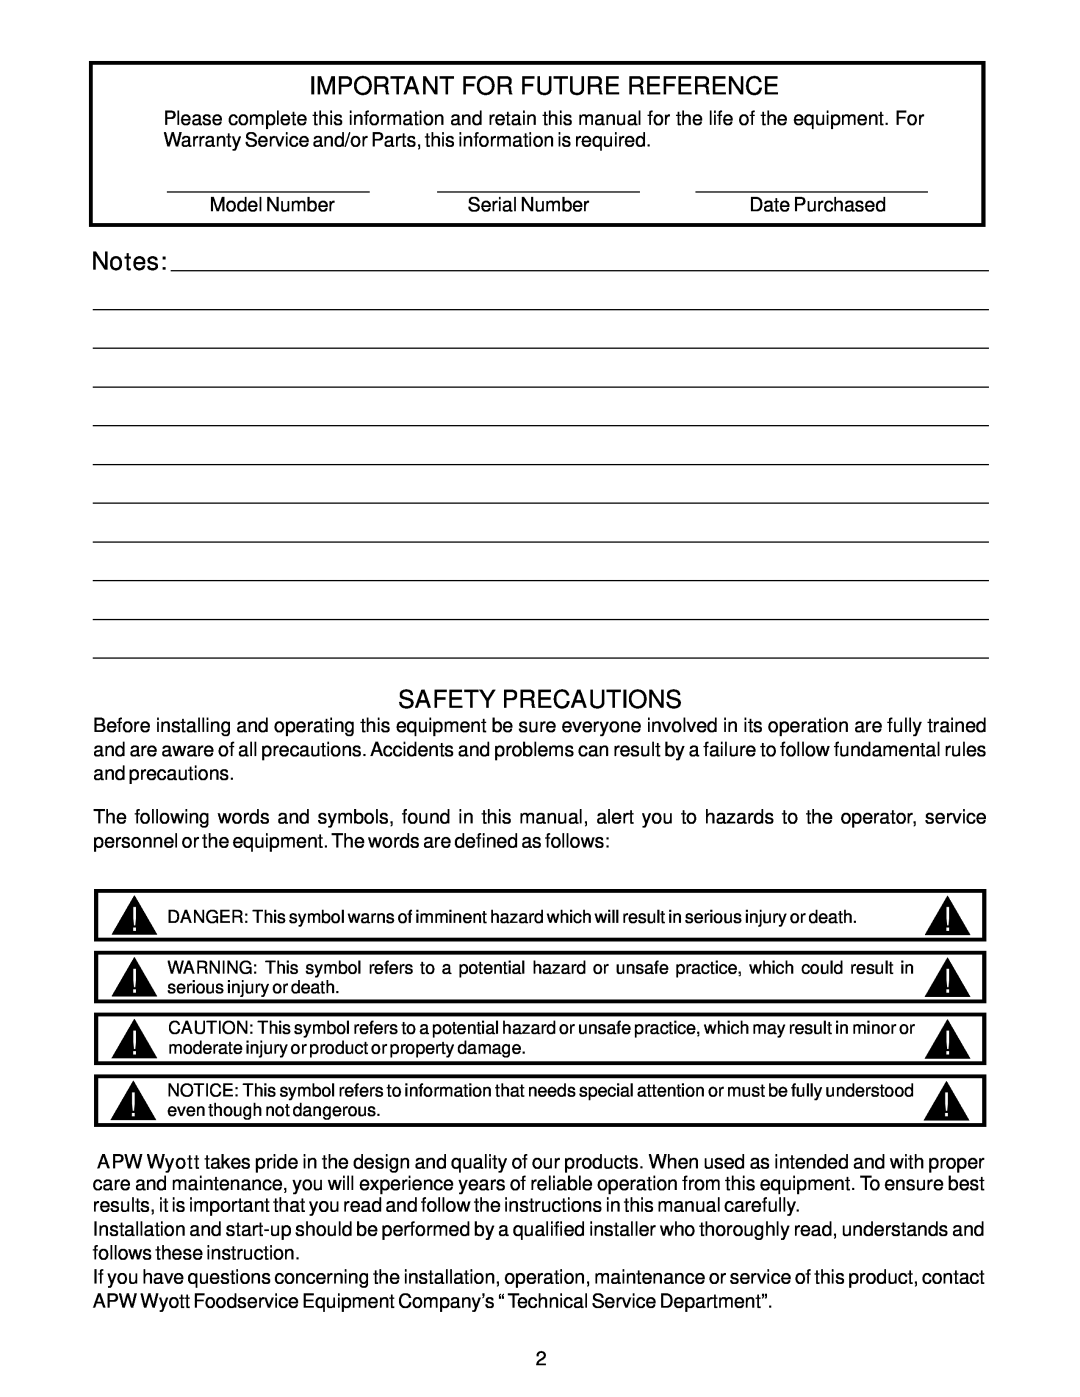 APW Wyott AT Express important safety instructions Important For Future Reference, Notes SAFETY PRECAUTIONS 